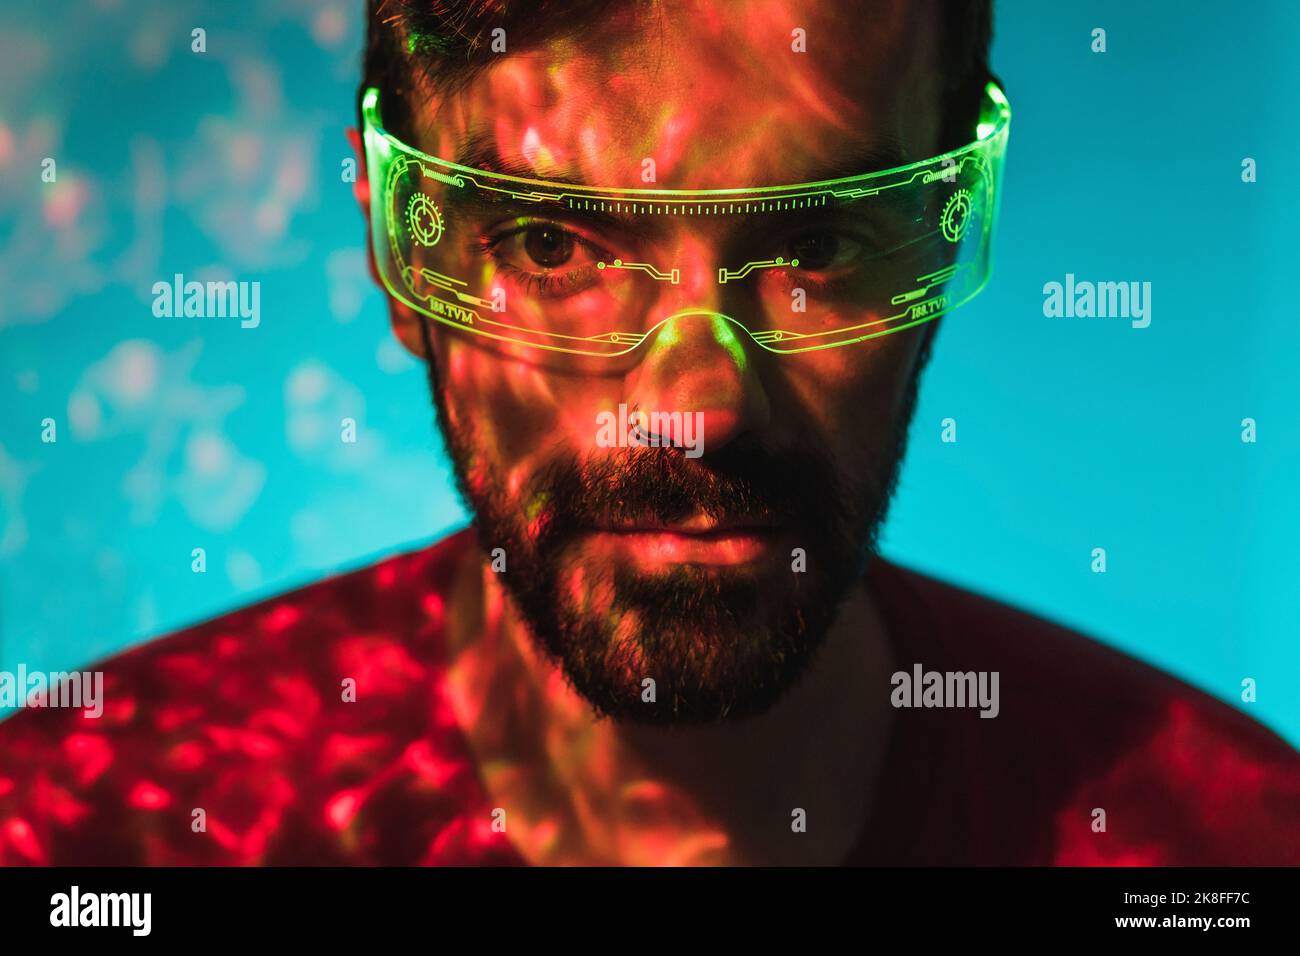 Man with nose ring wearing green smart glasses Stock Photo